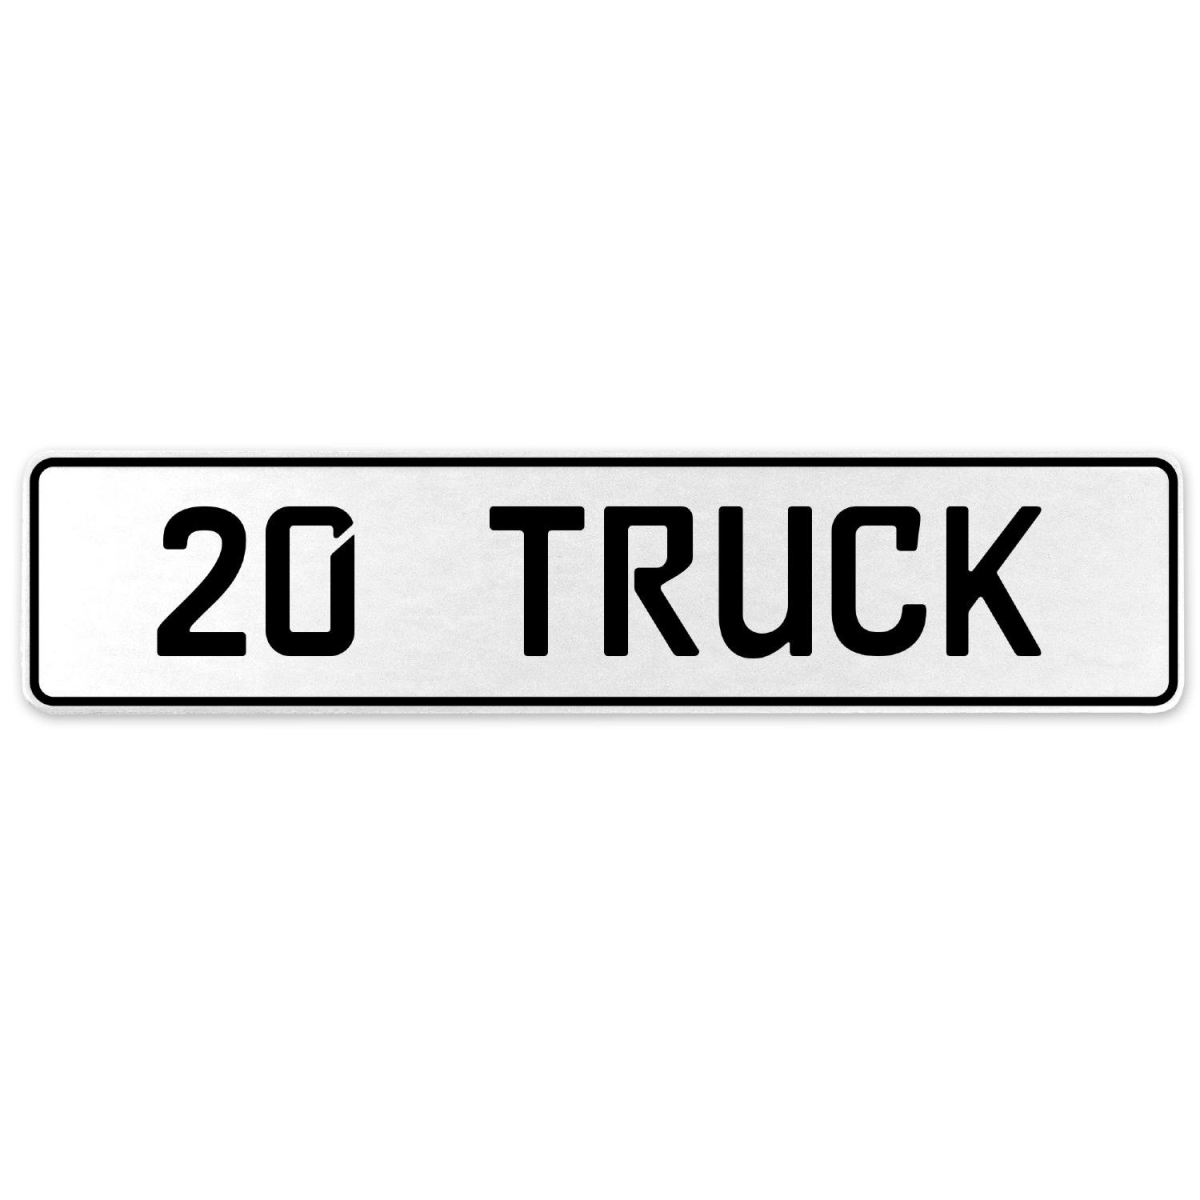 20 Truck - White Aluminum Street Sign Mancave Euro Plate Name Door Sign Wall